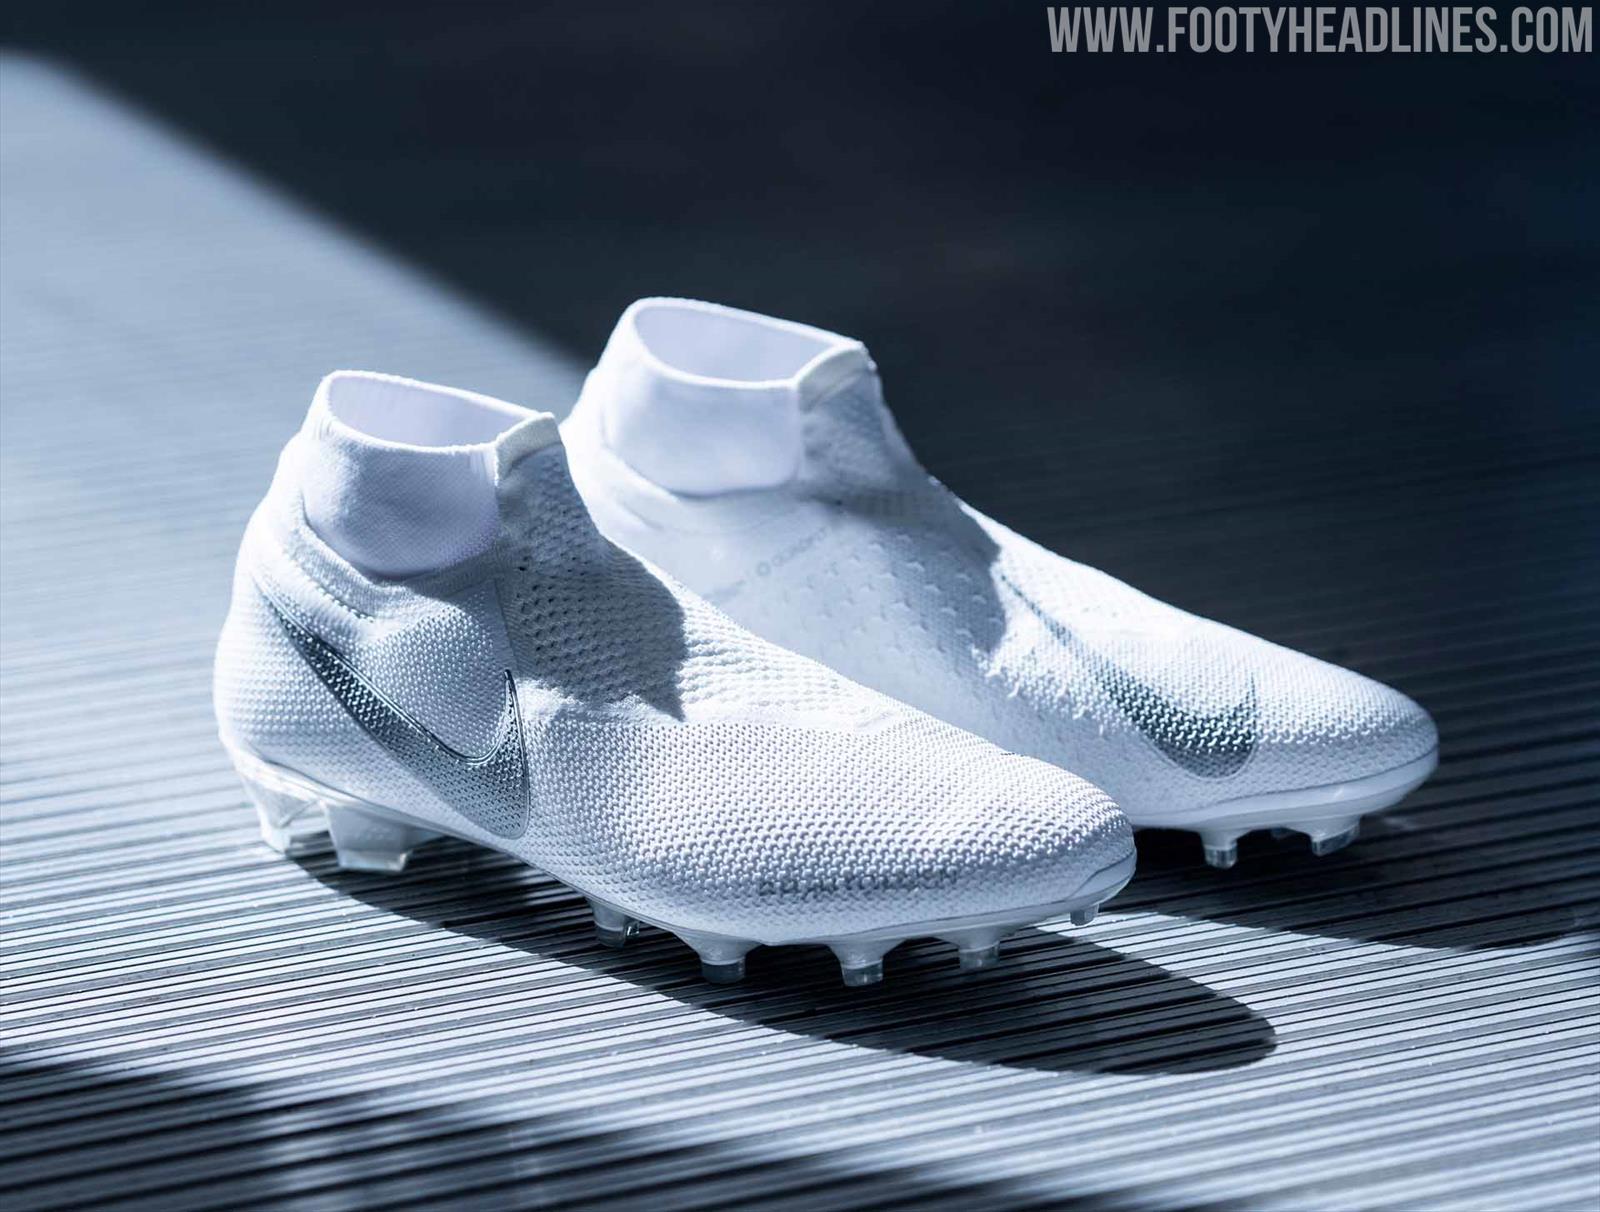 Nike Phantom Vision 'Nuovo White Pack' Boots Released Footy Headlines